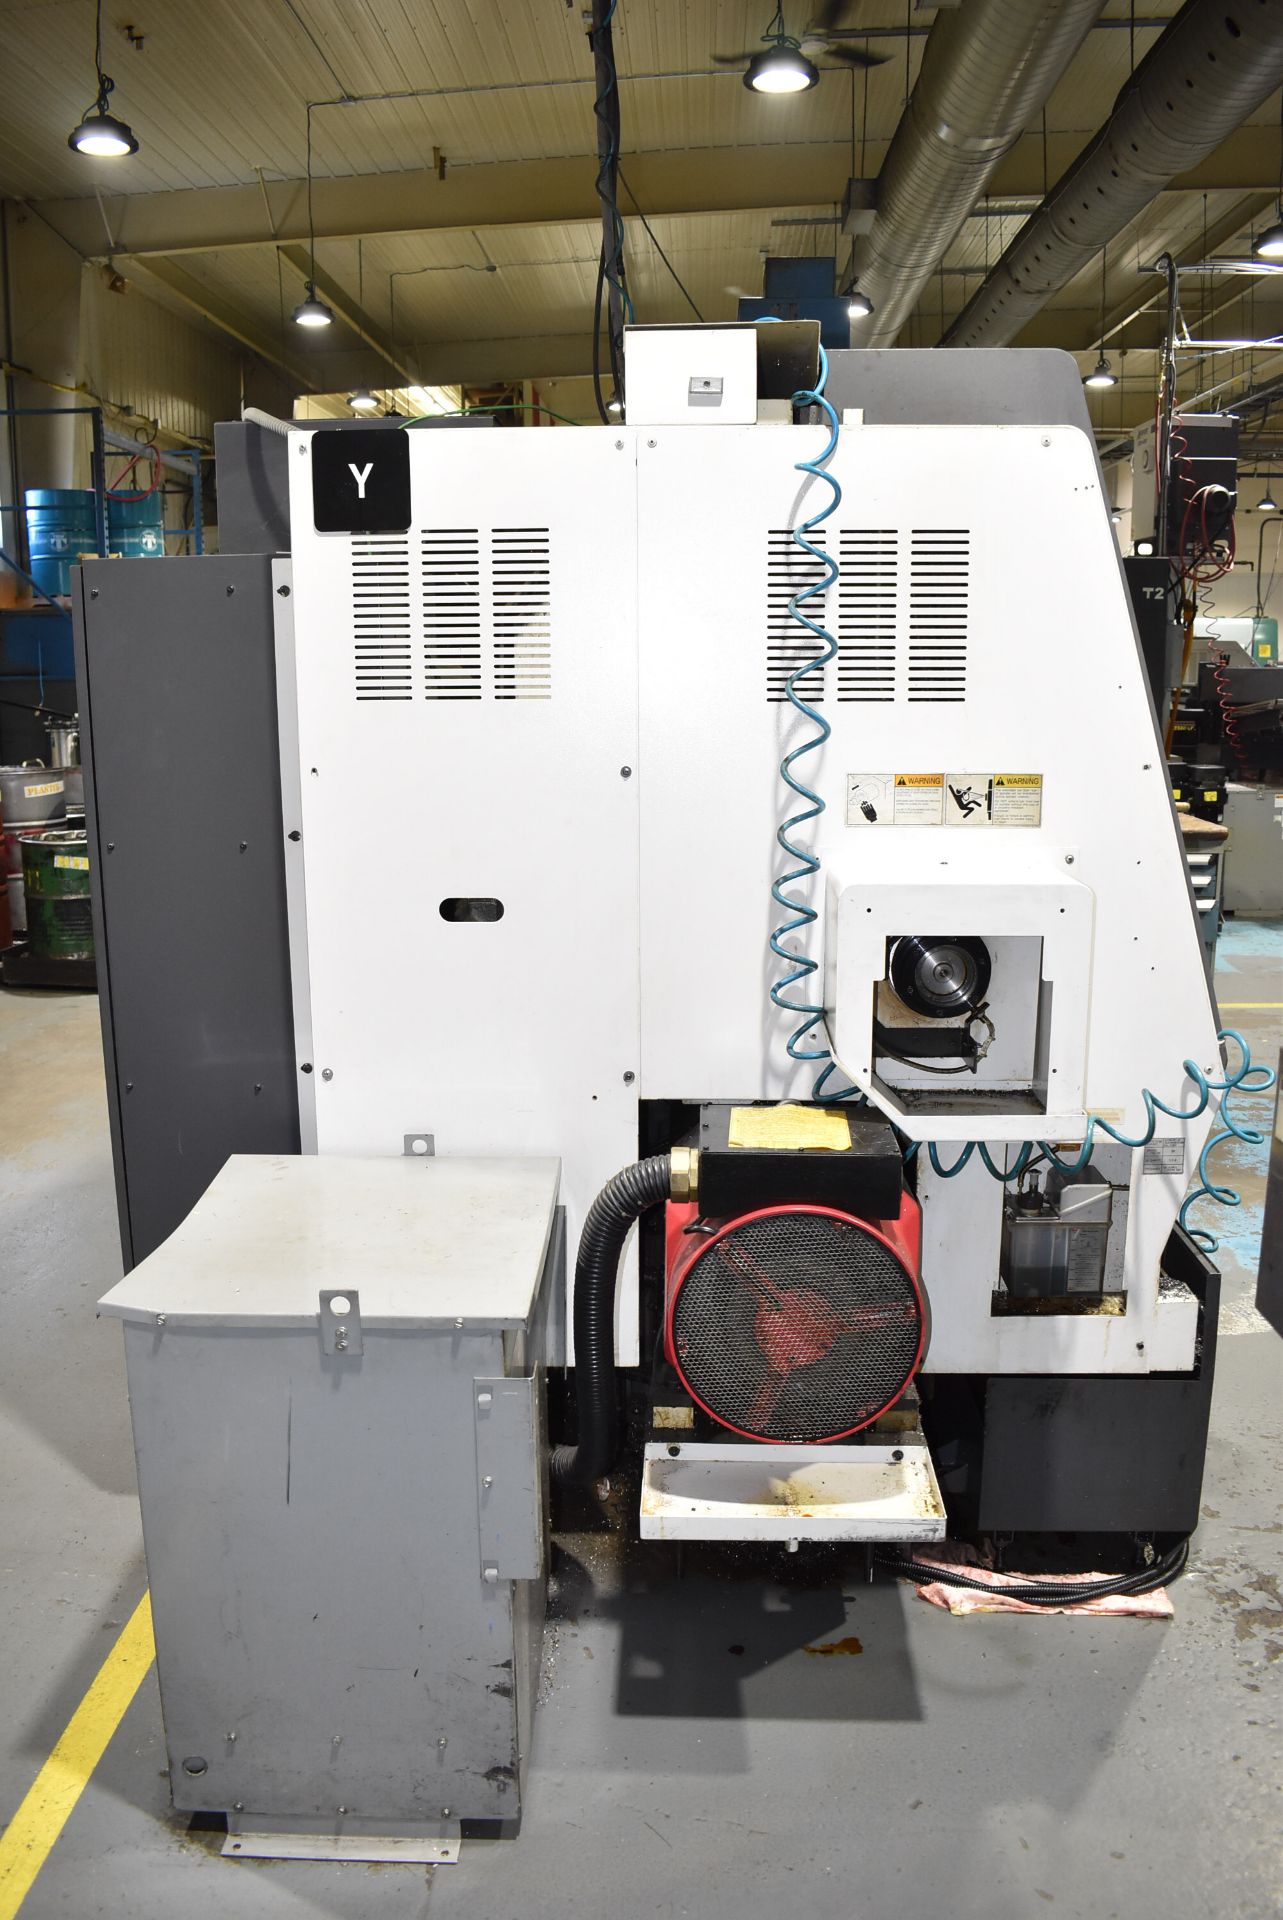 NAKAMURA-TOME (2009) SC-450 CNC TURNING CENTER WITH FANUC SERIES 21I-TB CNC CONTROL, 31.88" SWING - Image 11 of 13